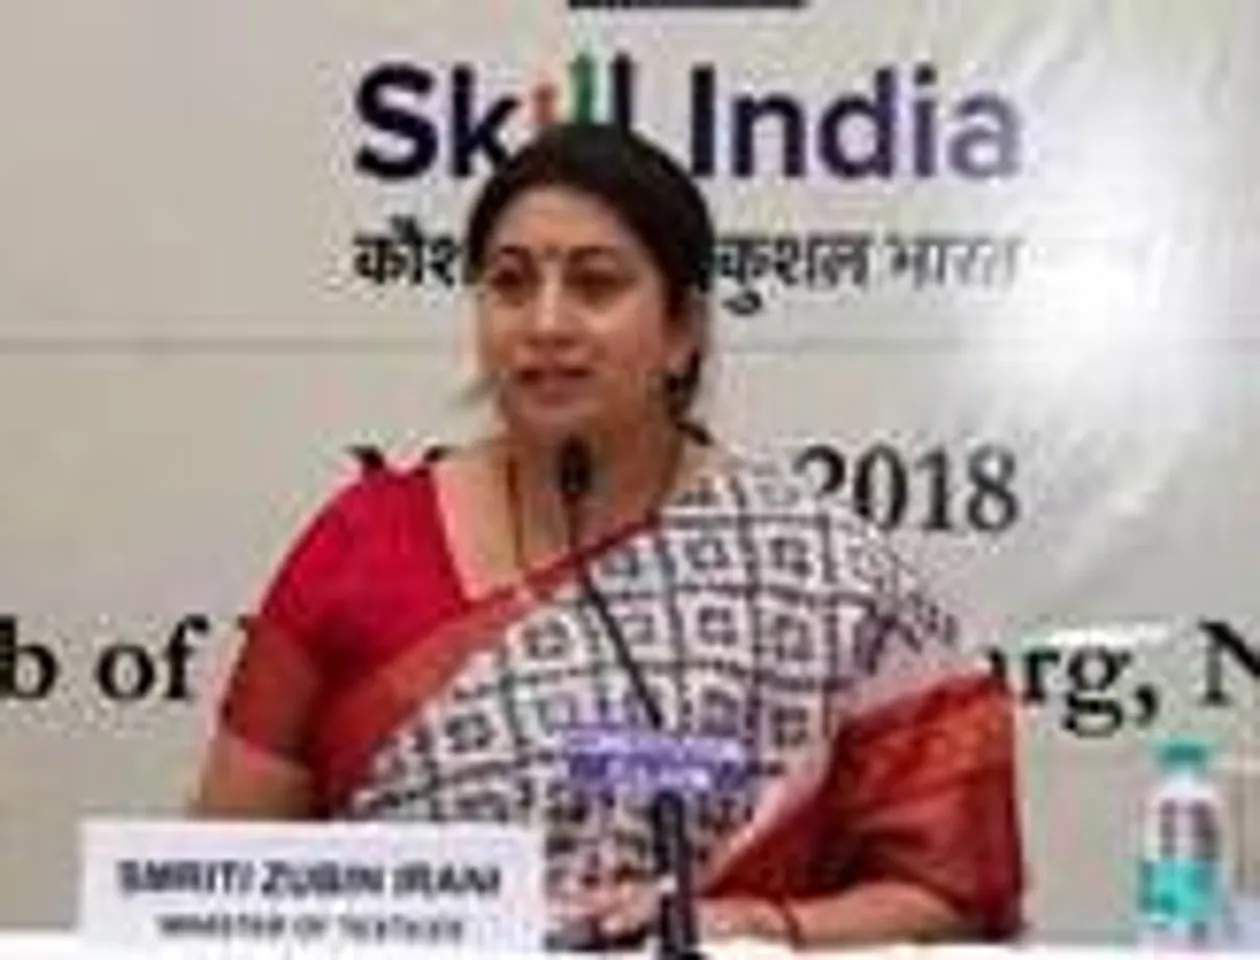 Textile Industry Will Get Full Support from Govt. to Ensure Job Creation: Smriti Irani